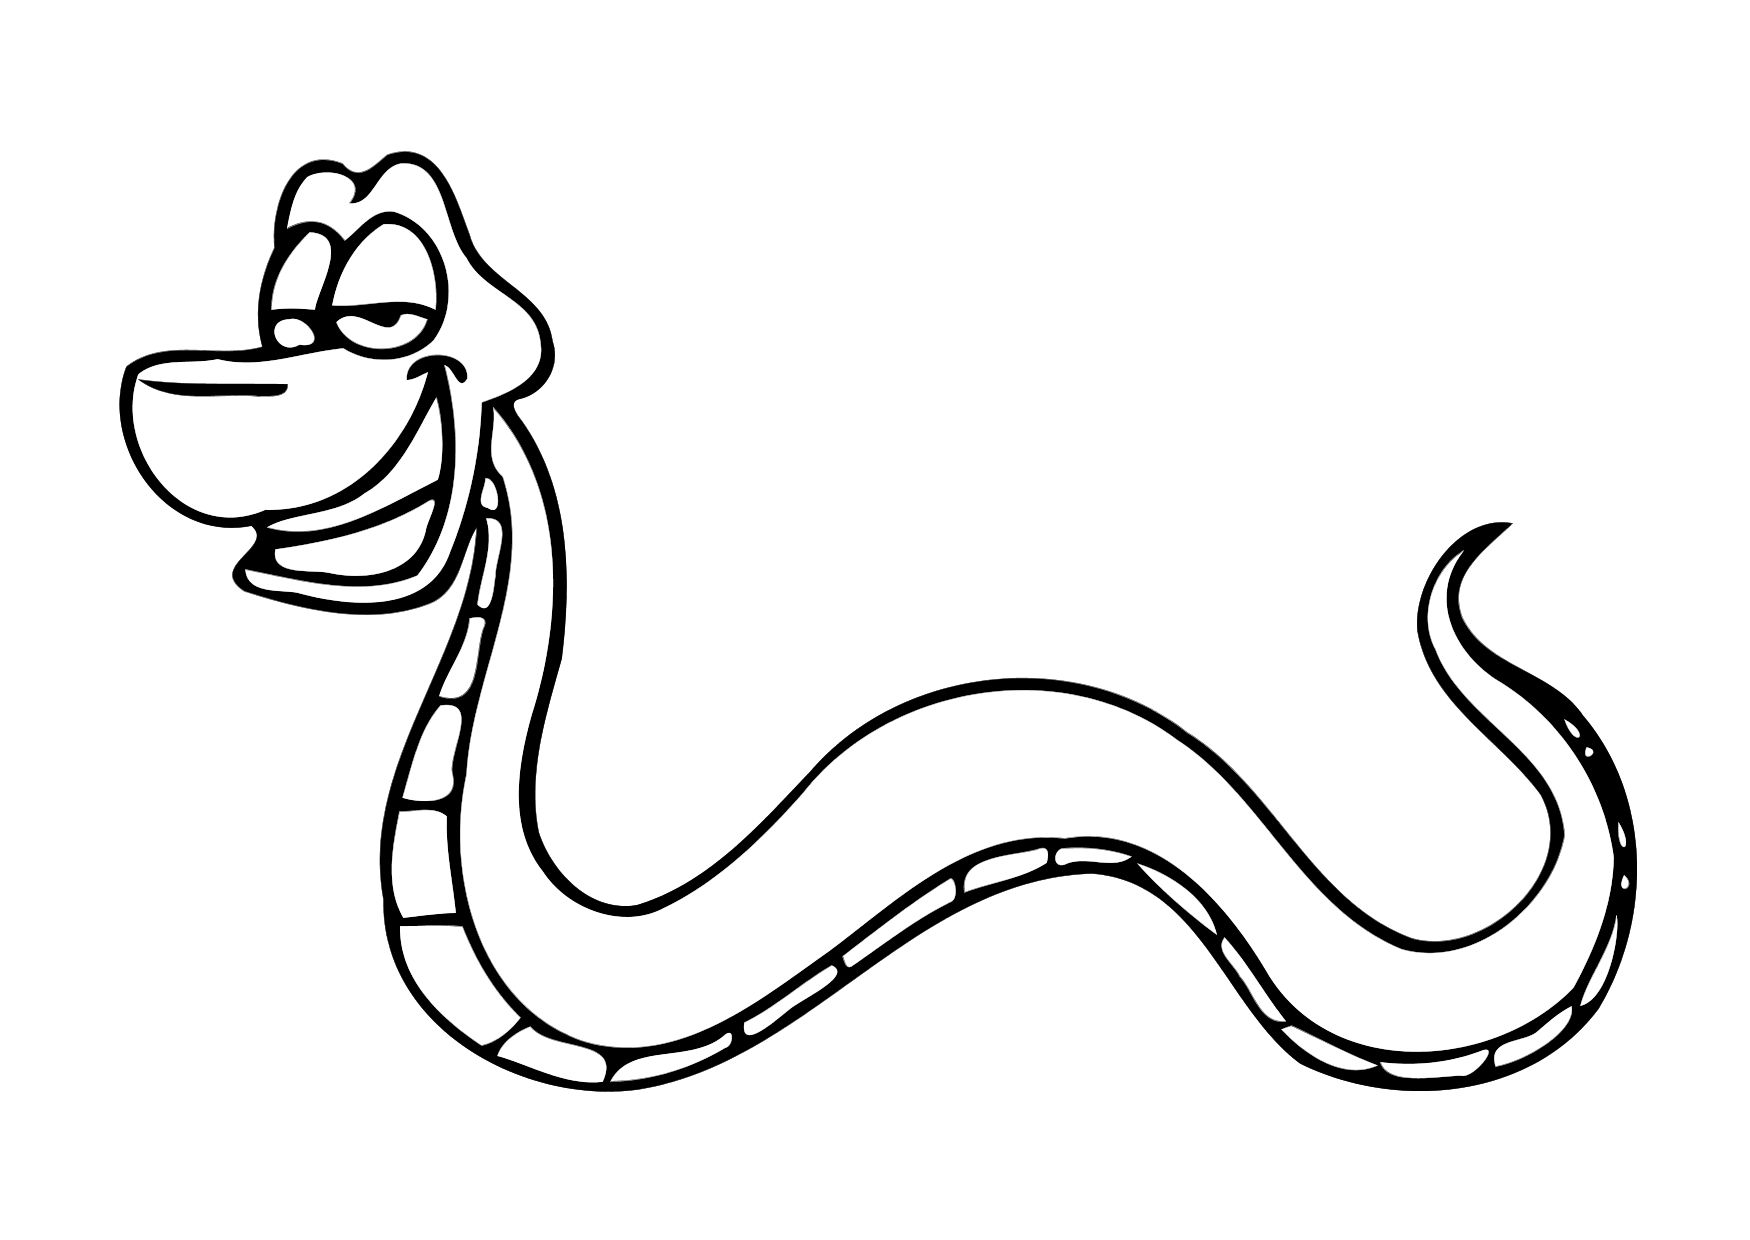 Snake Line Drawing - ClipArt Best